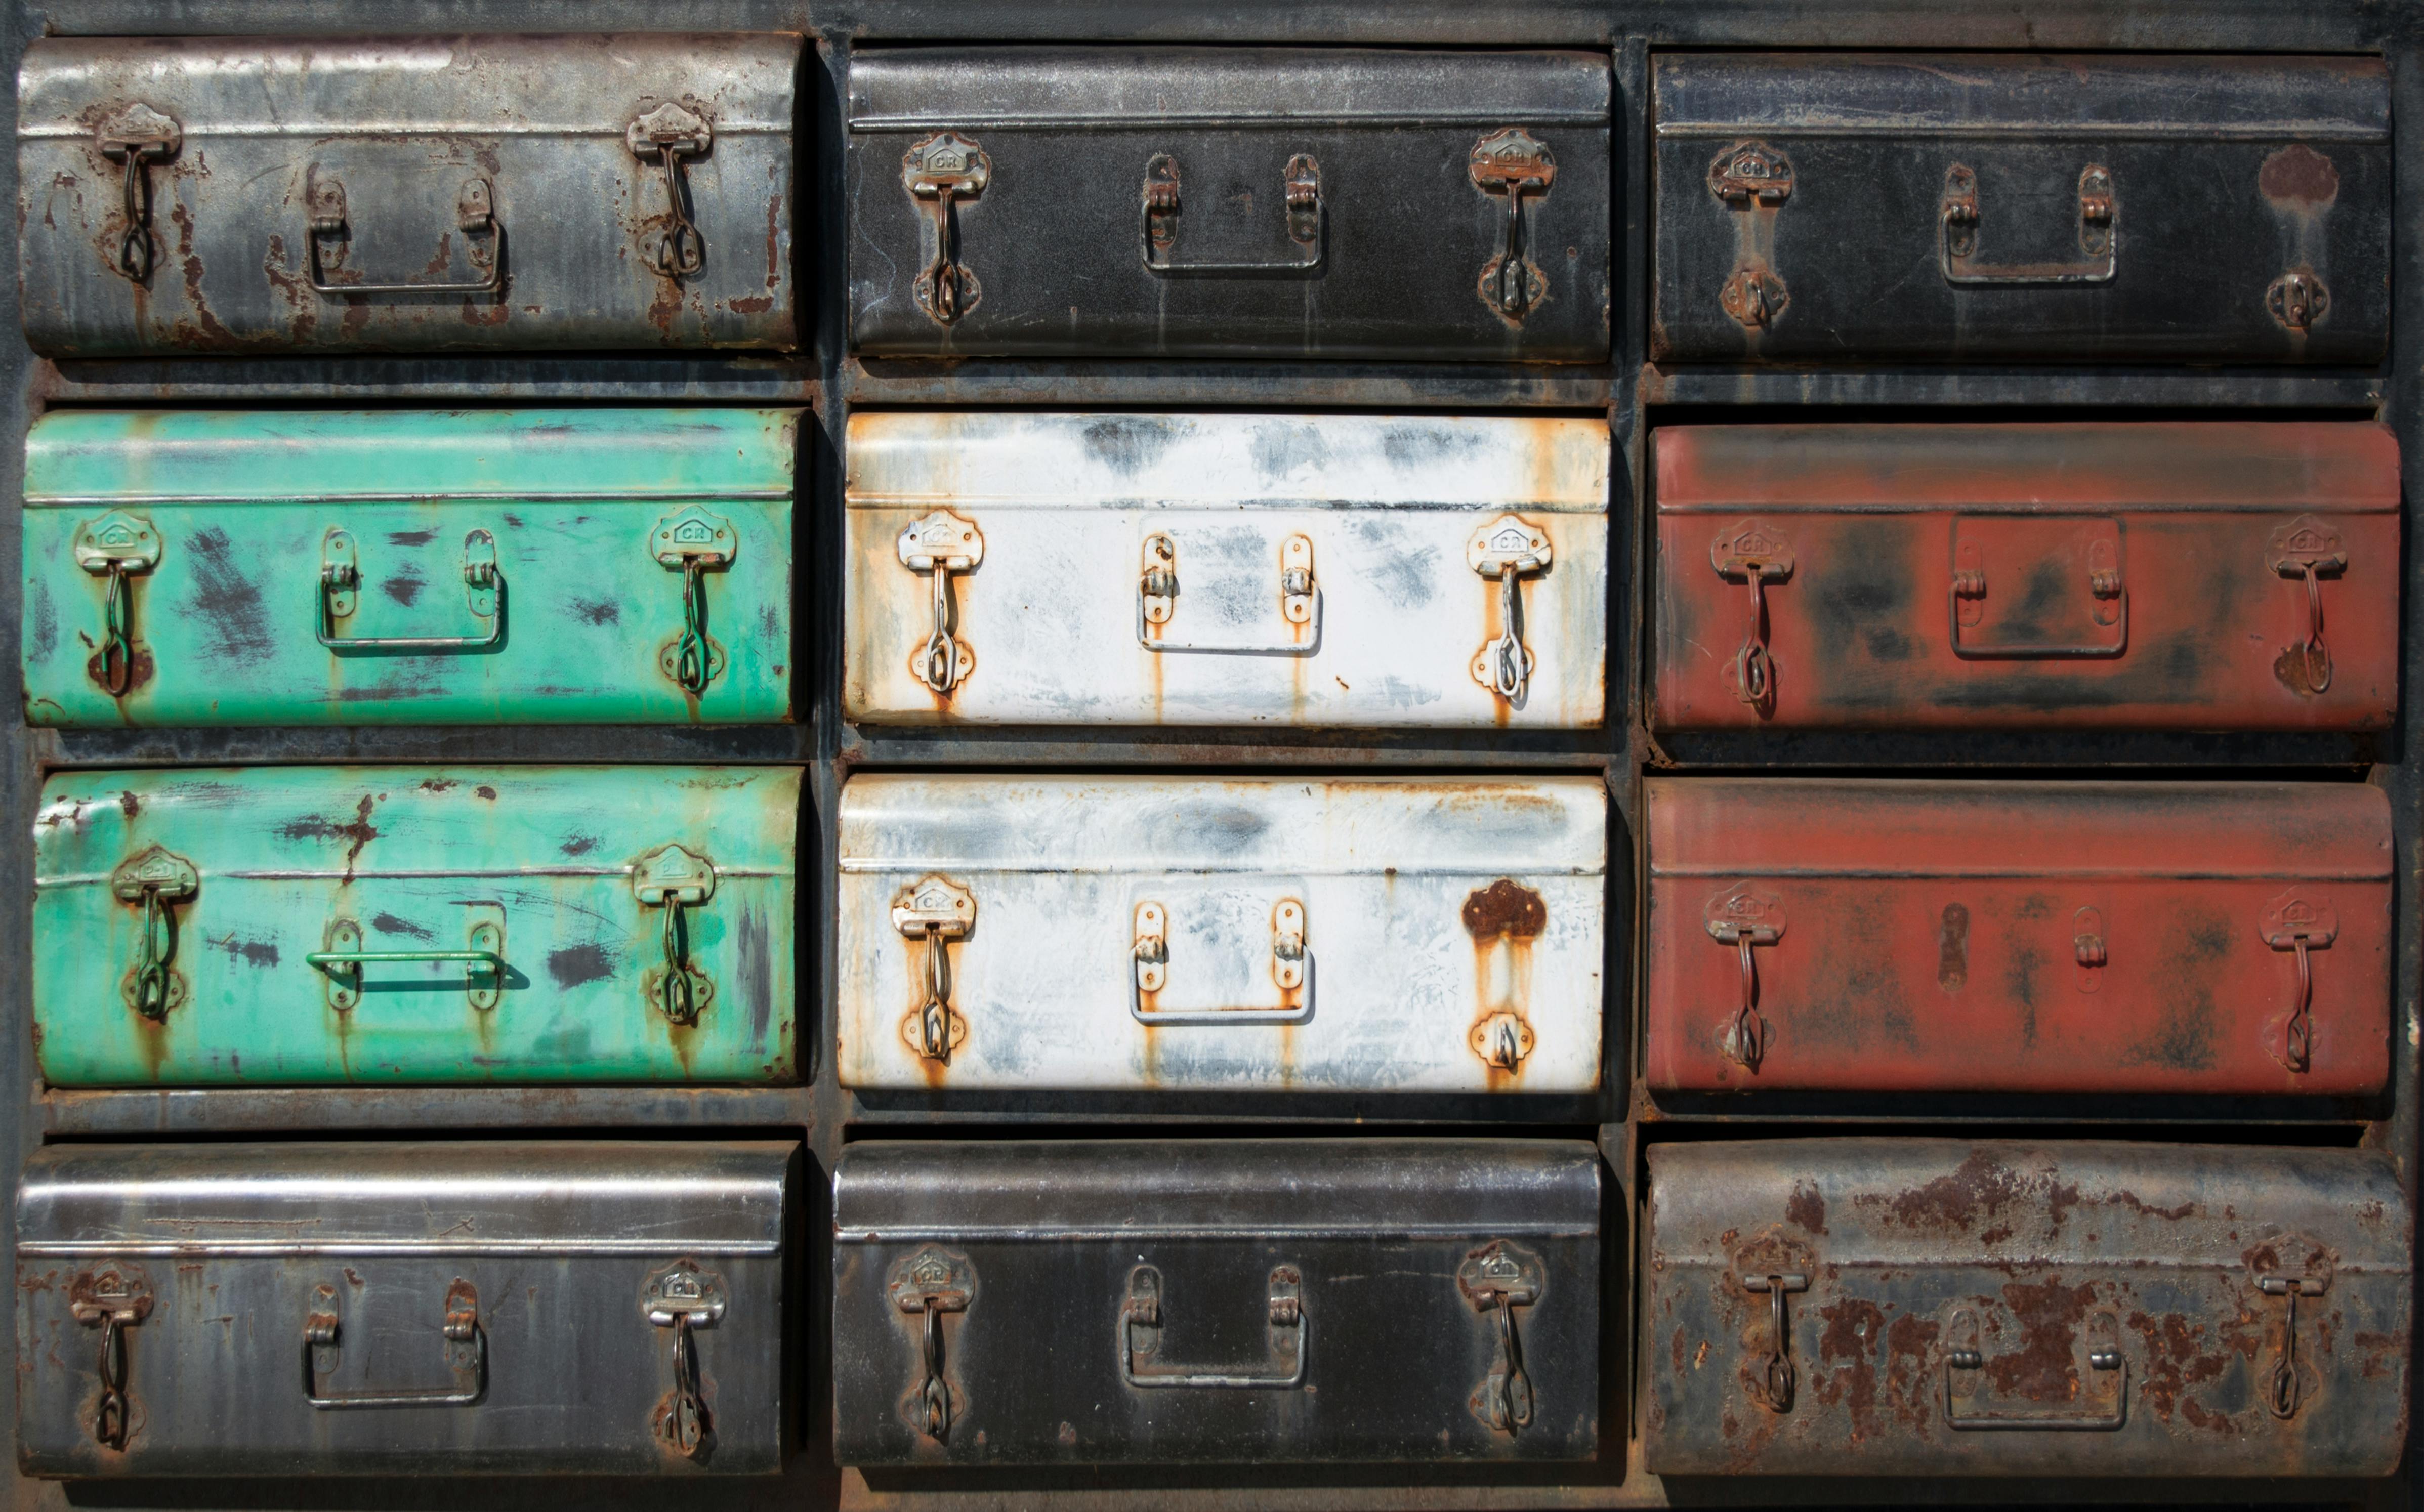 Free stock photo of old suitcase, suitcase art, suitcase sculpture